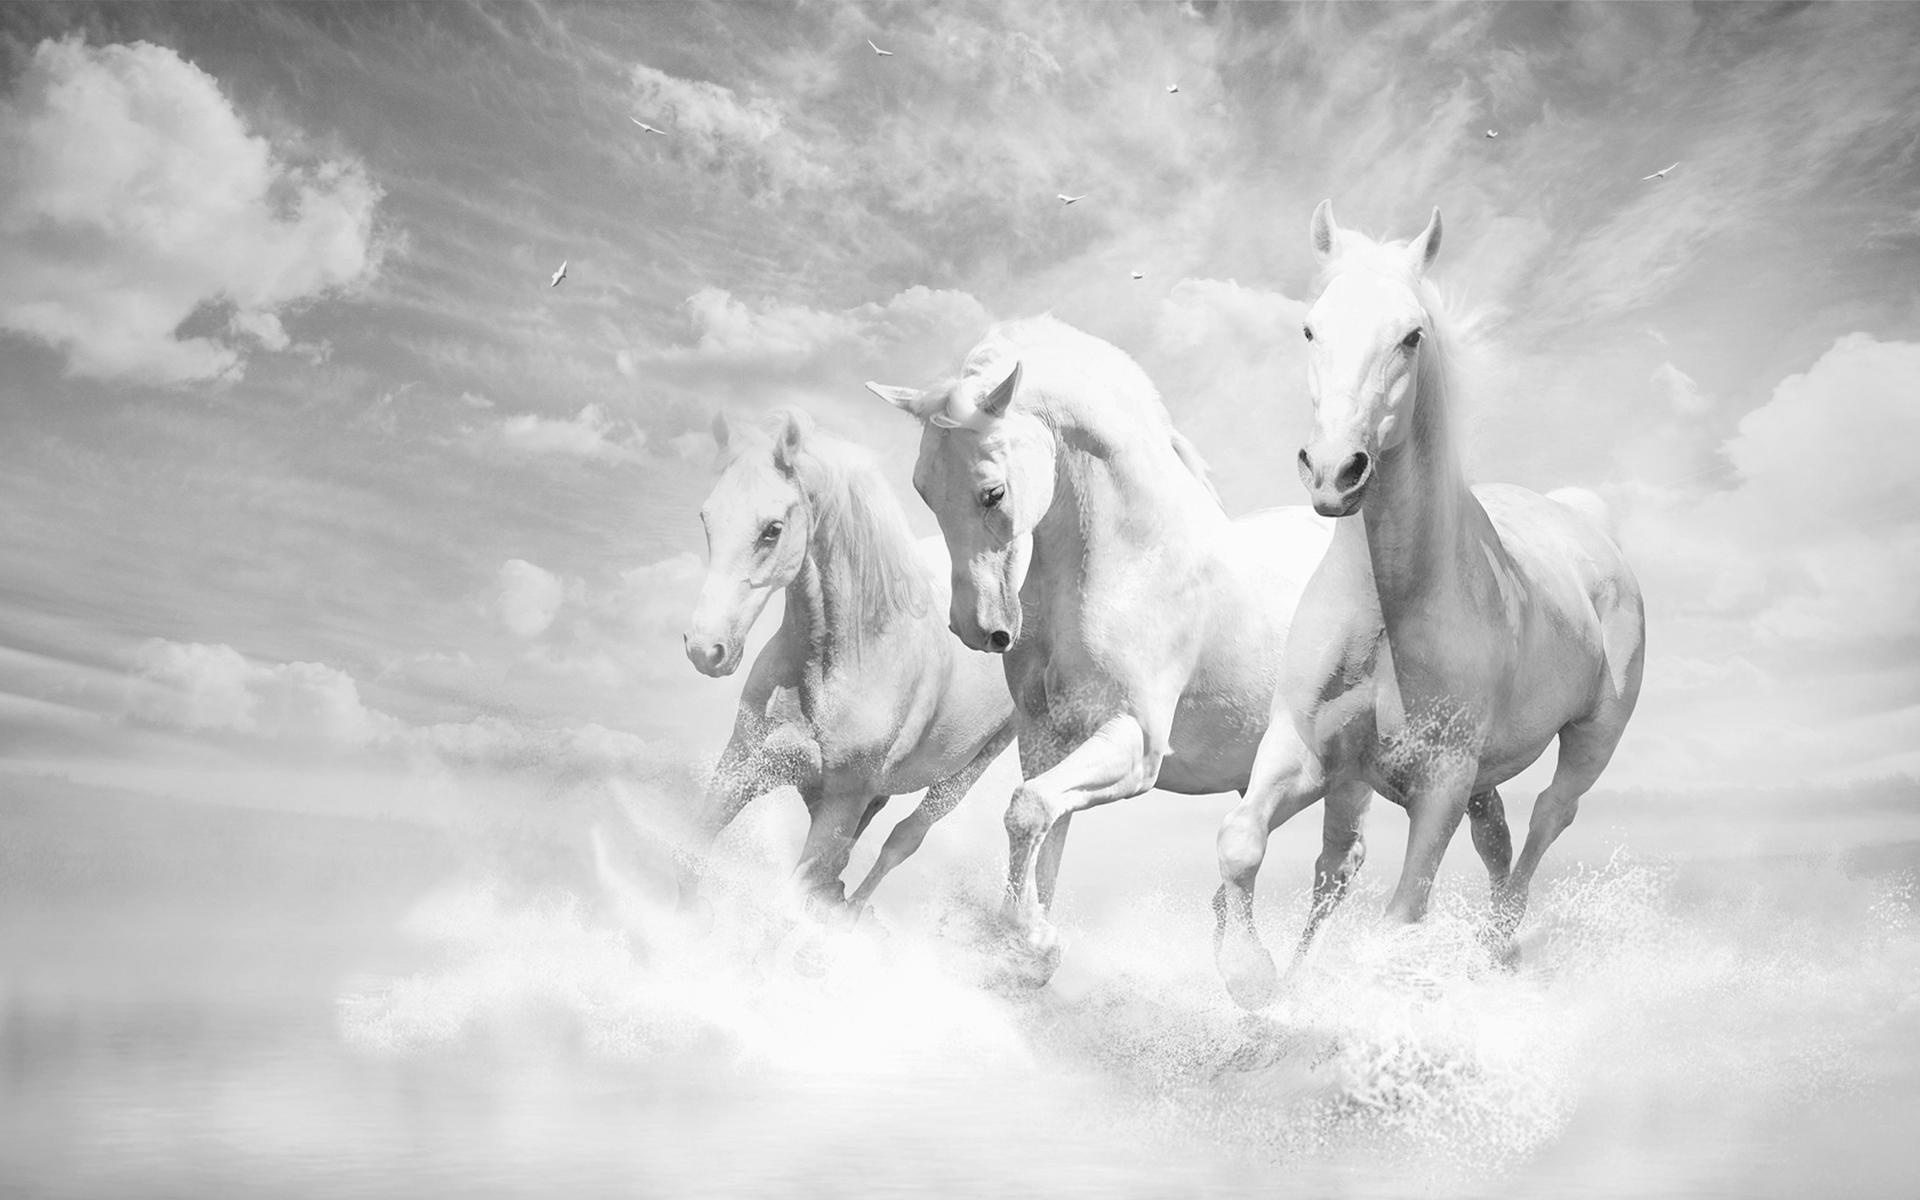 Animals & Birds Black And White White Horses Wallpaper. Black and other